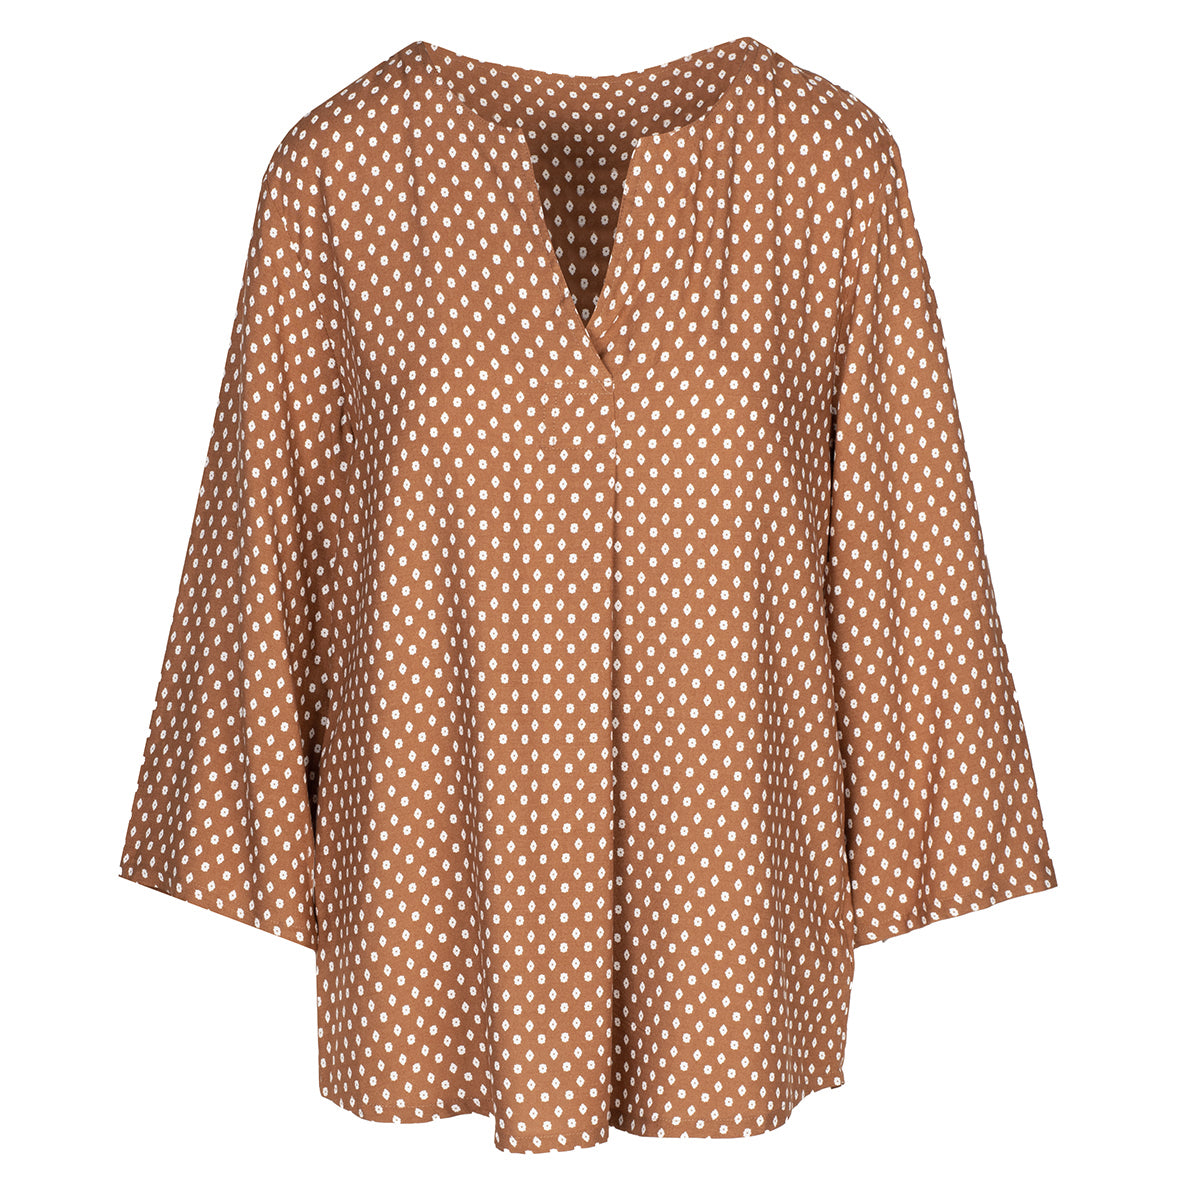 LUXZUZ // ONE TWO August Blouse Blouse 784 Cinnamon